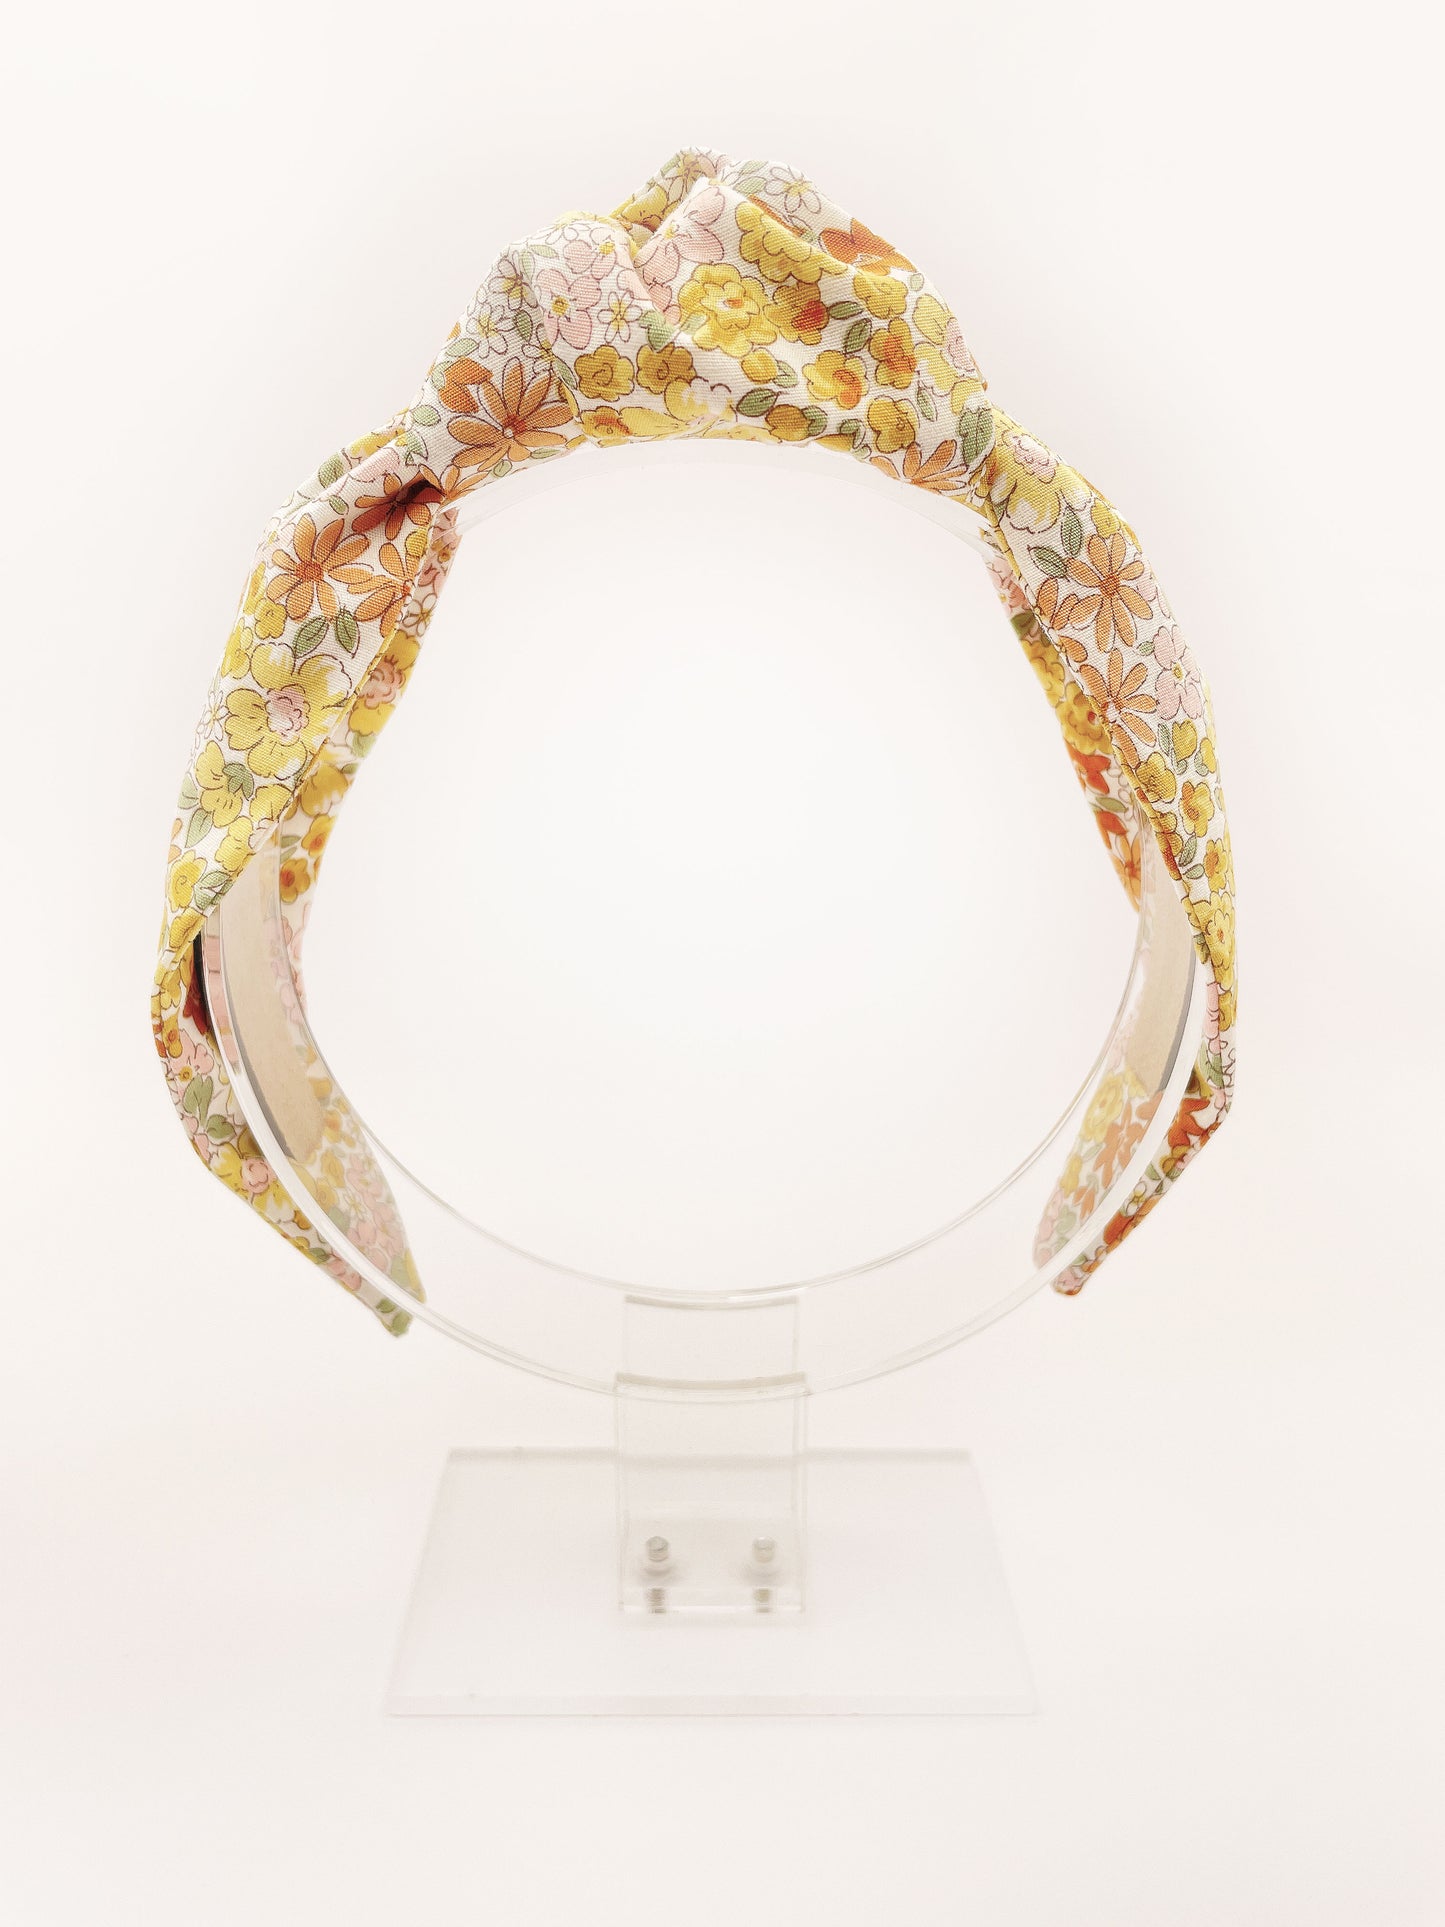 Handmade knotted headband with yellow flowers against an off white background